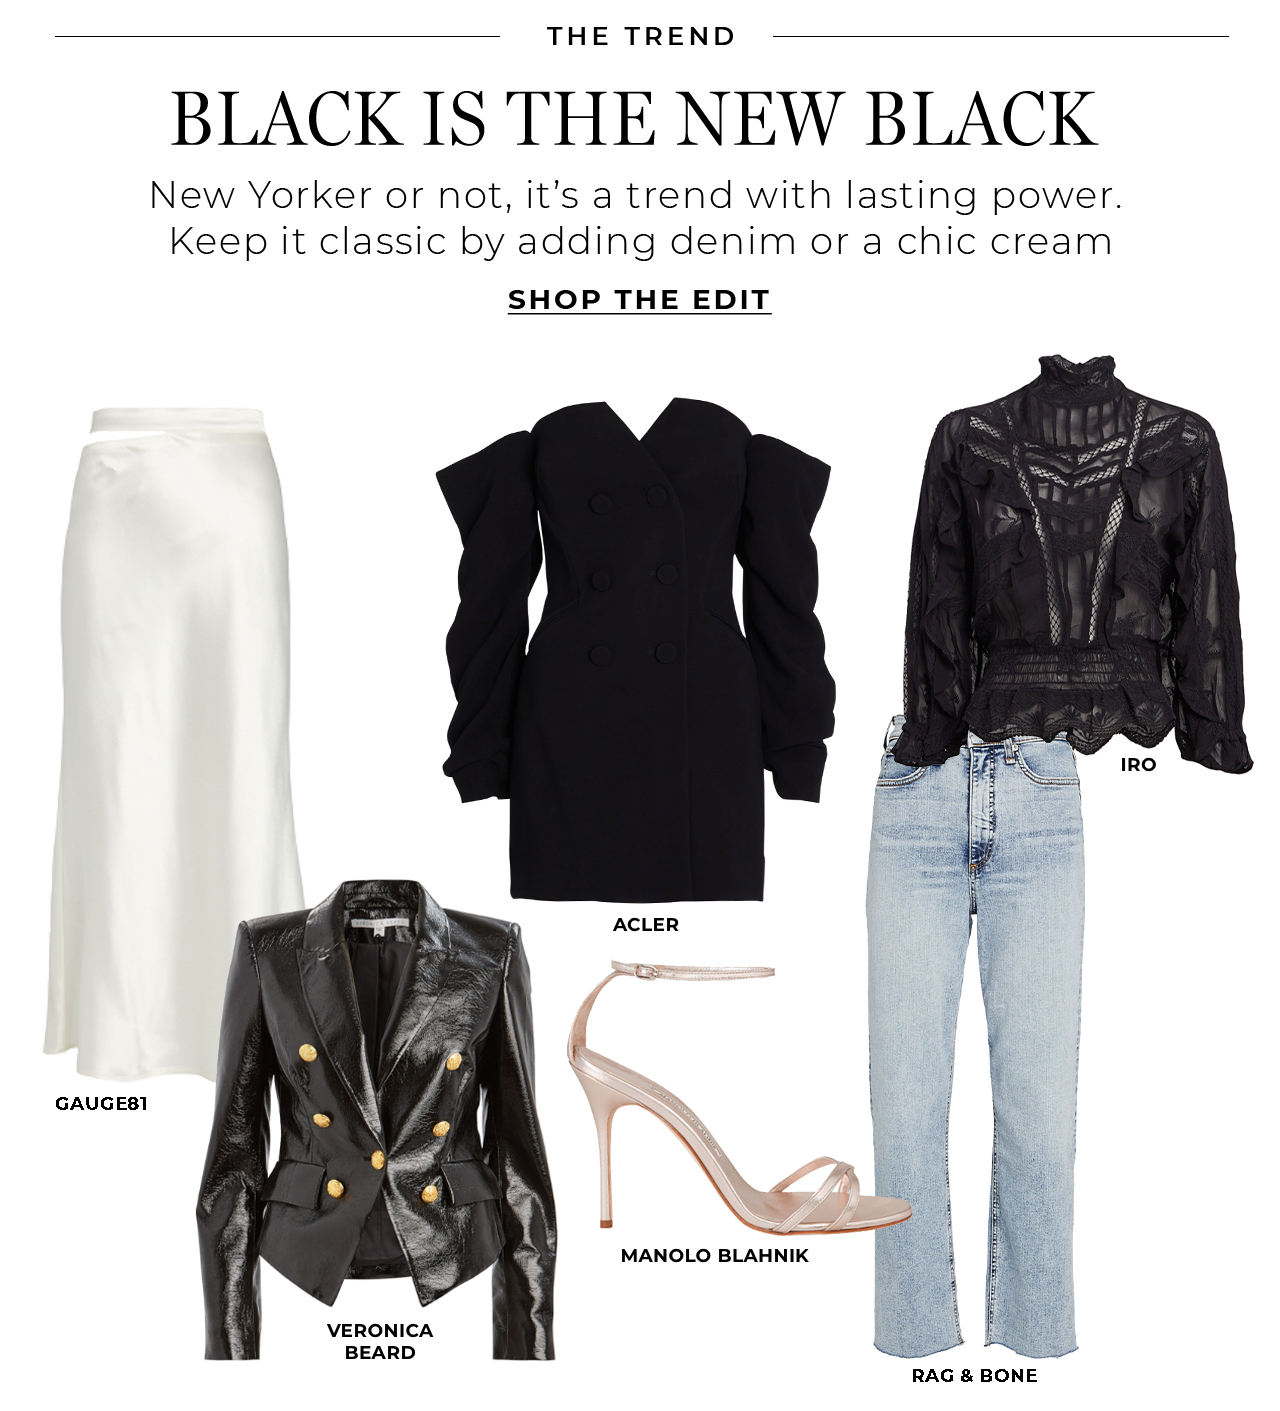 Black is the new black. Keep it classic with denim or a chic cream 